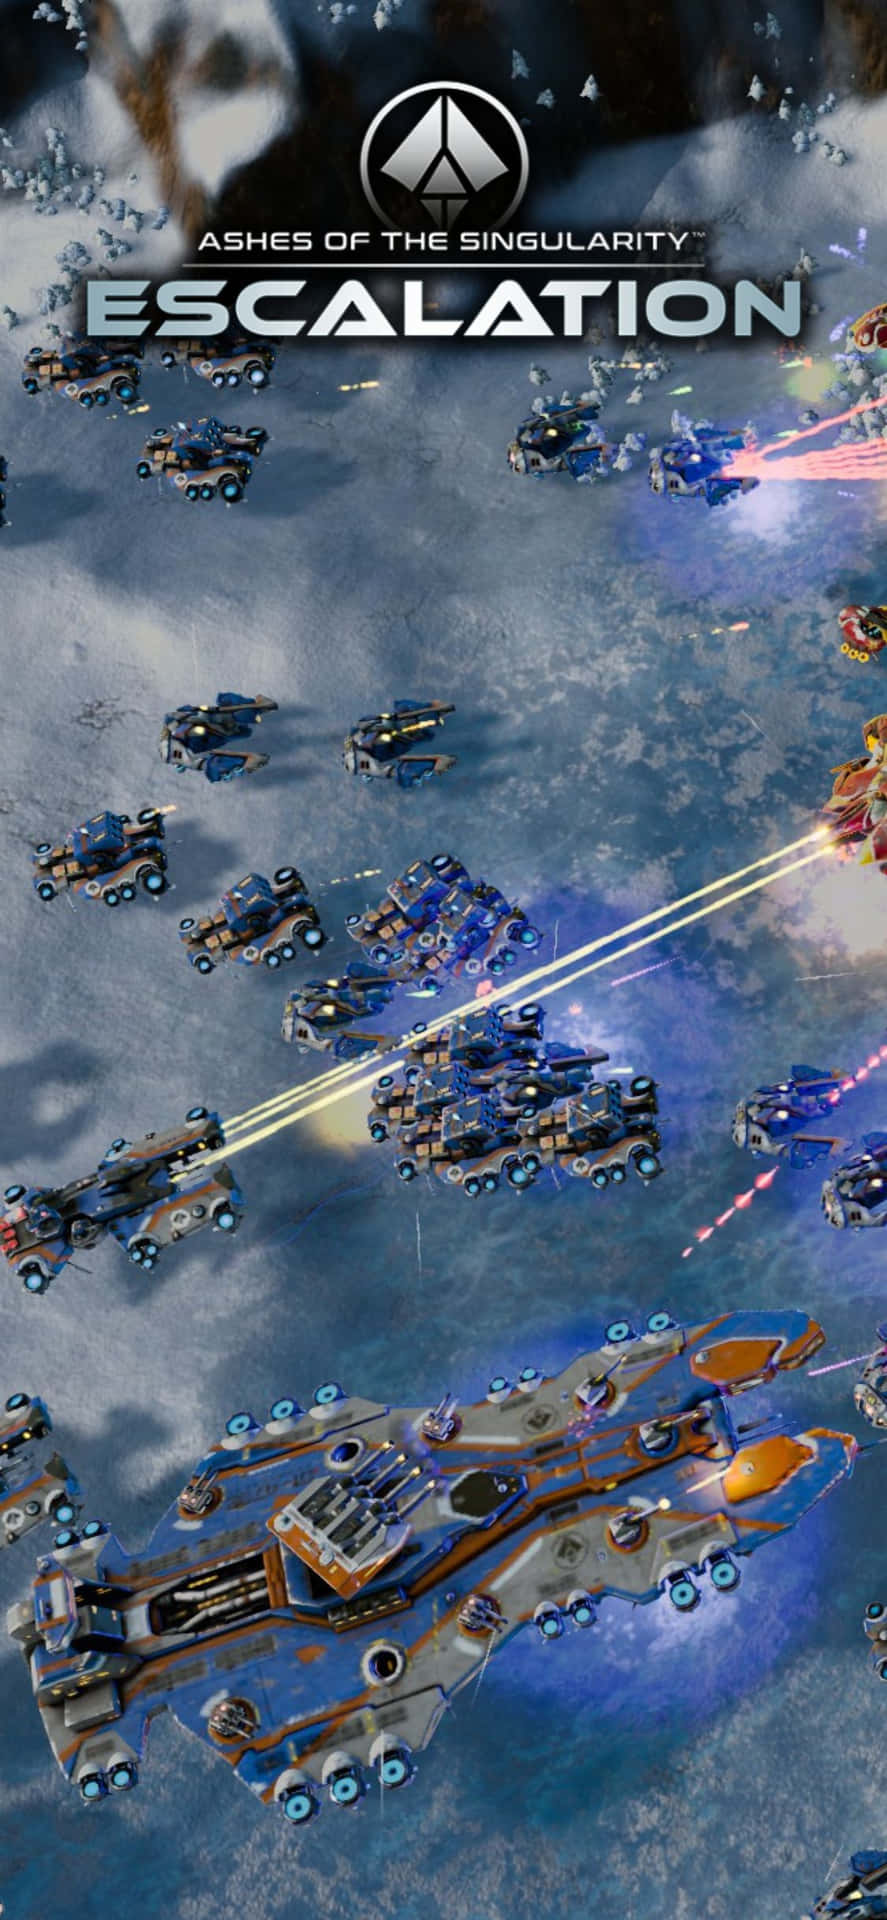 "Test Your Strategy Skills in Ashes Of The Singularity Escalation on Iphone X"